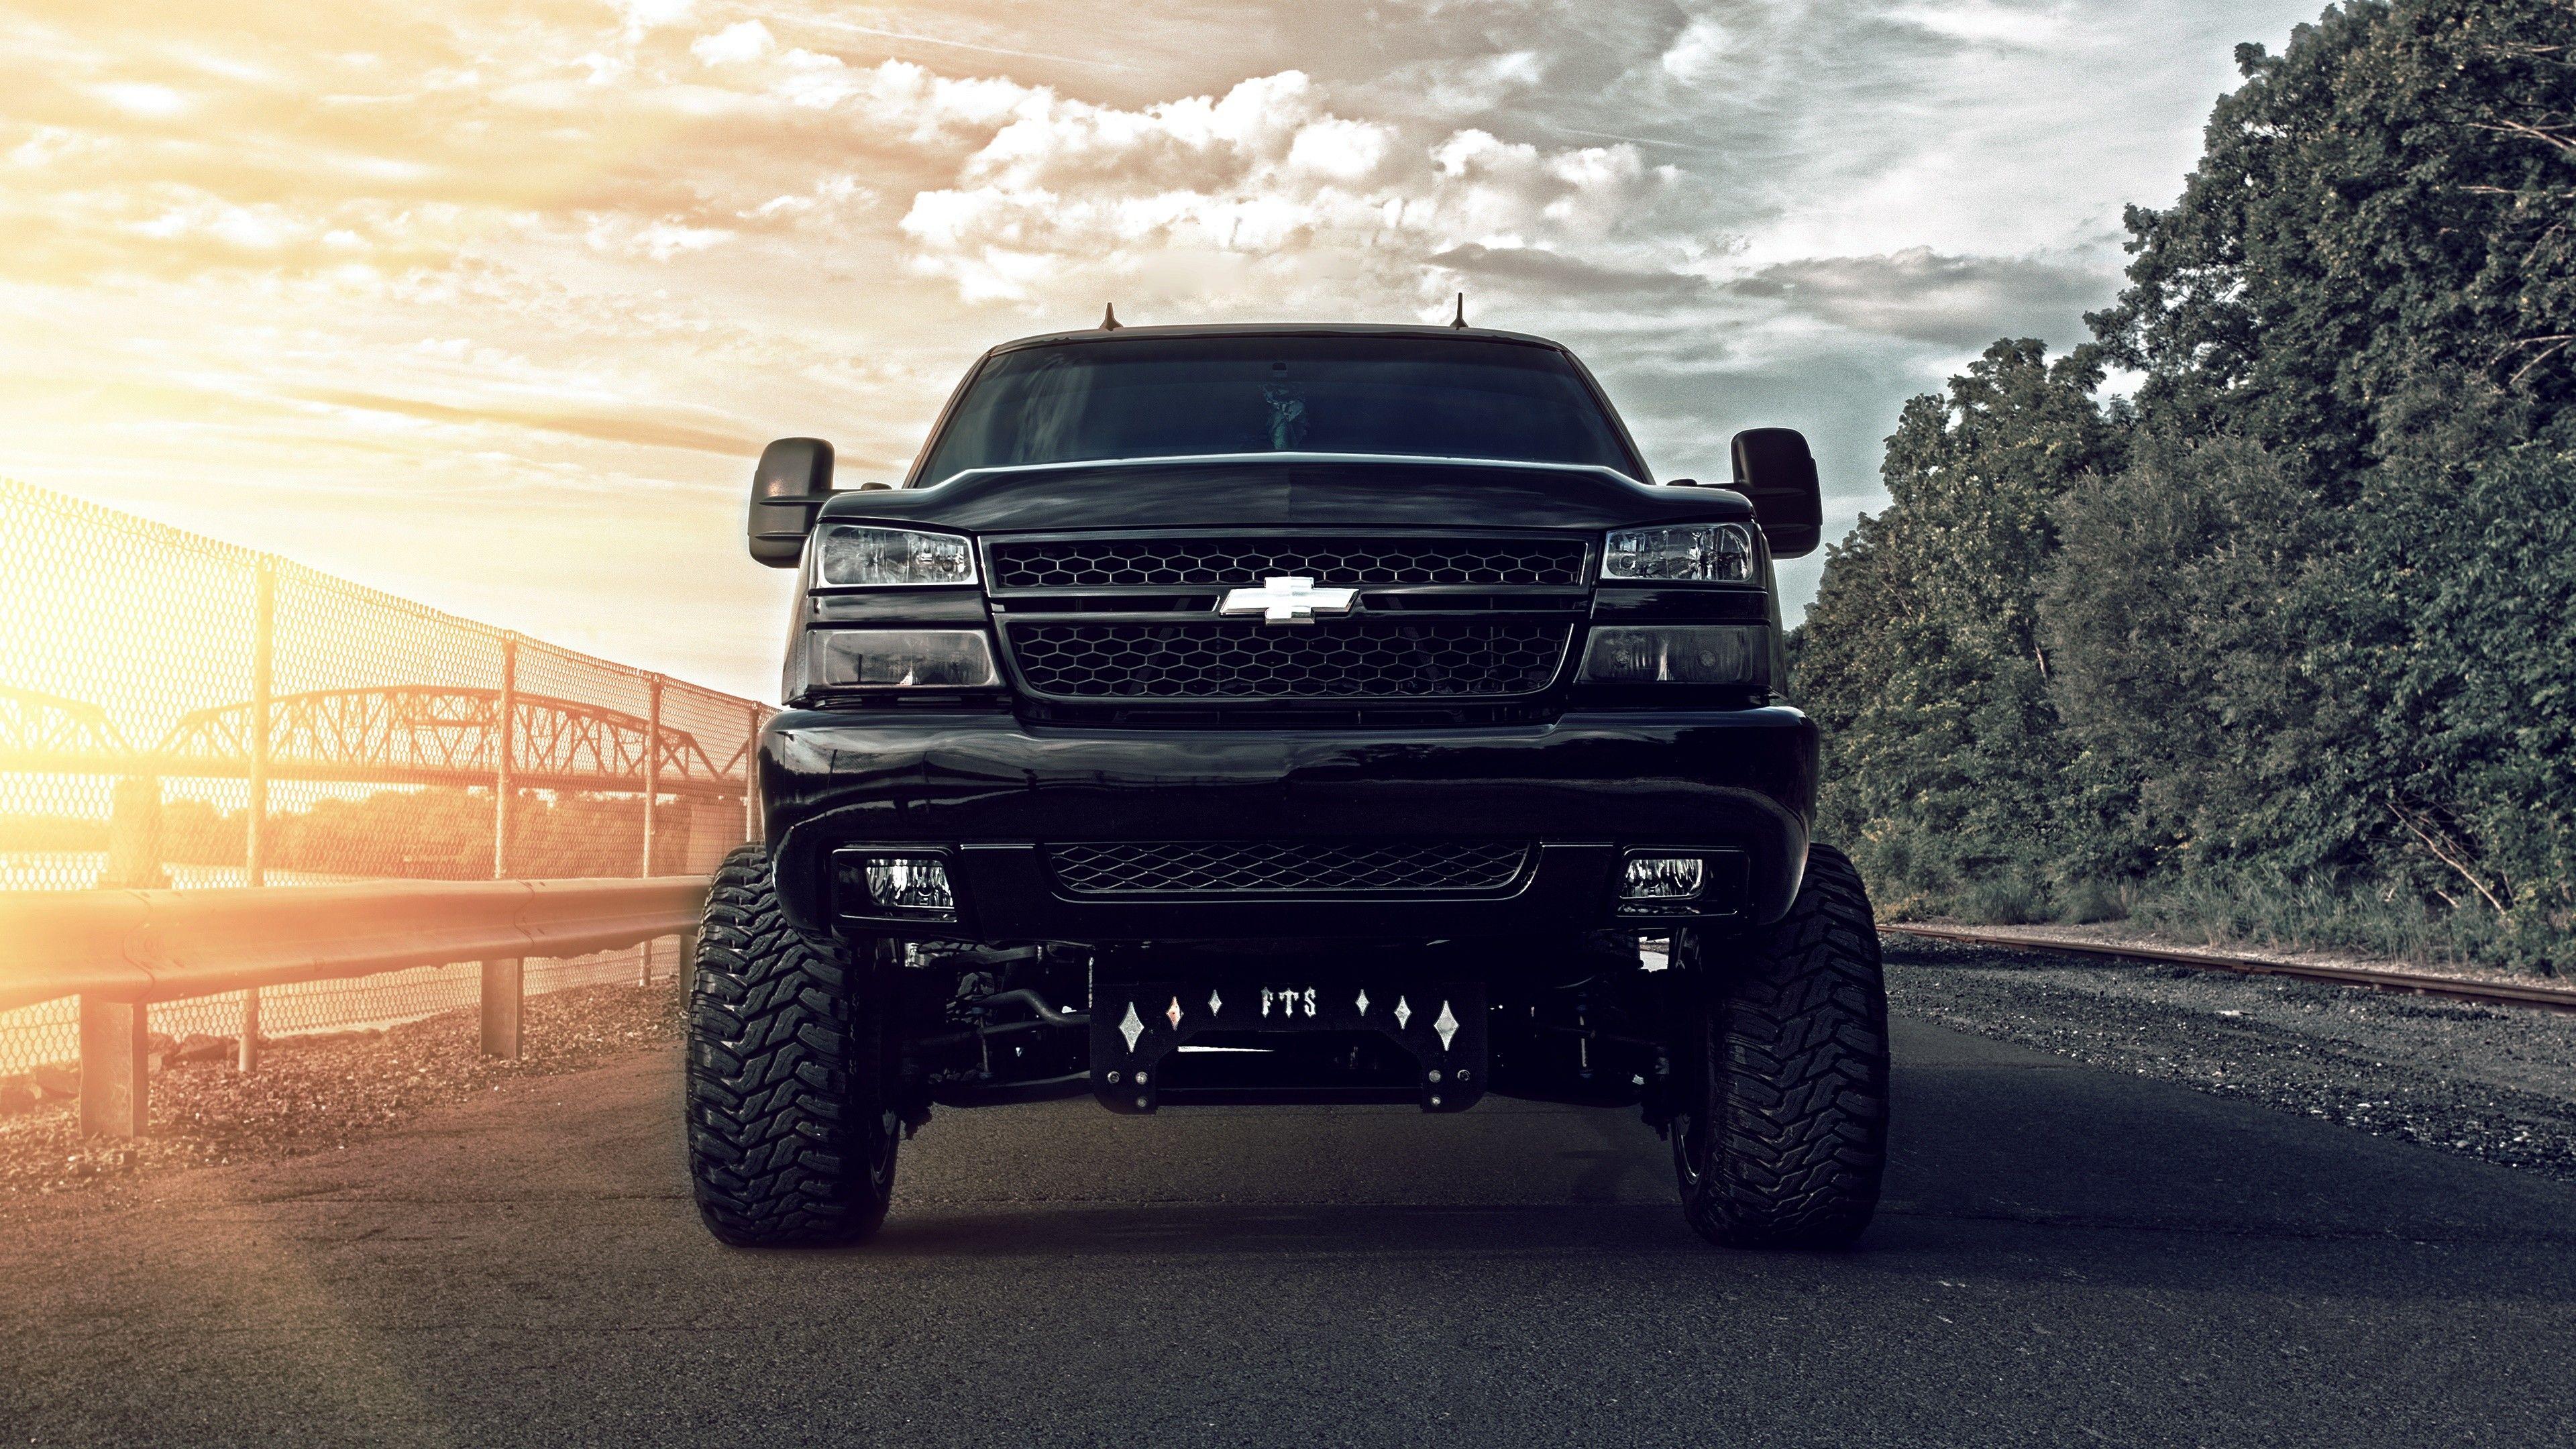 Chevy Truck Wallpapers - Top Free Chevy